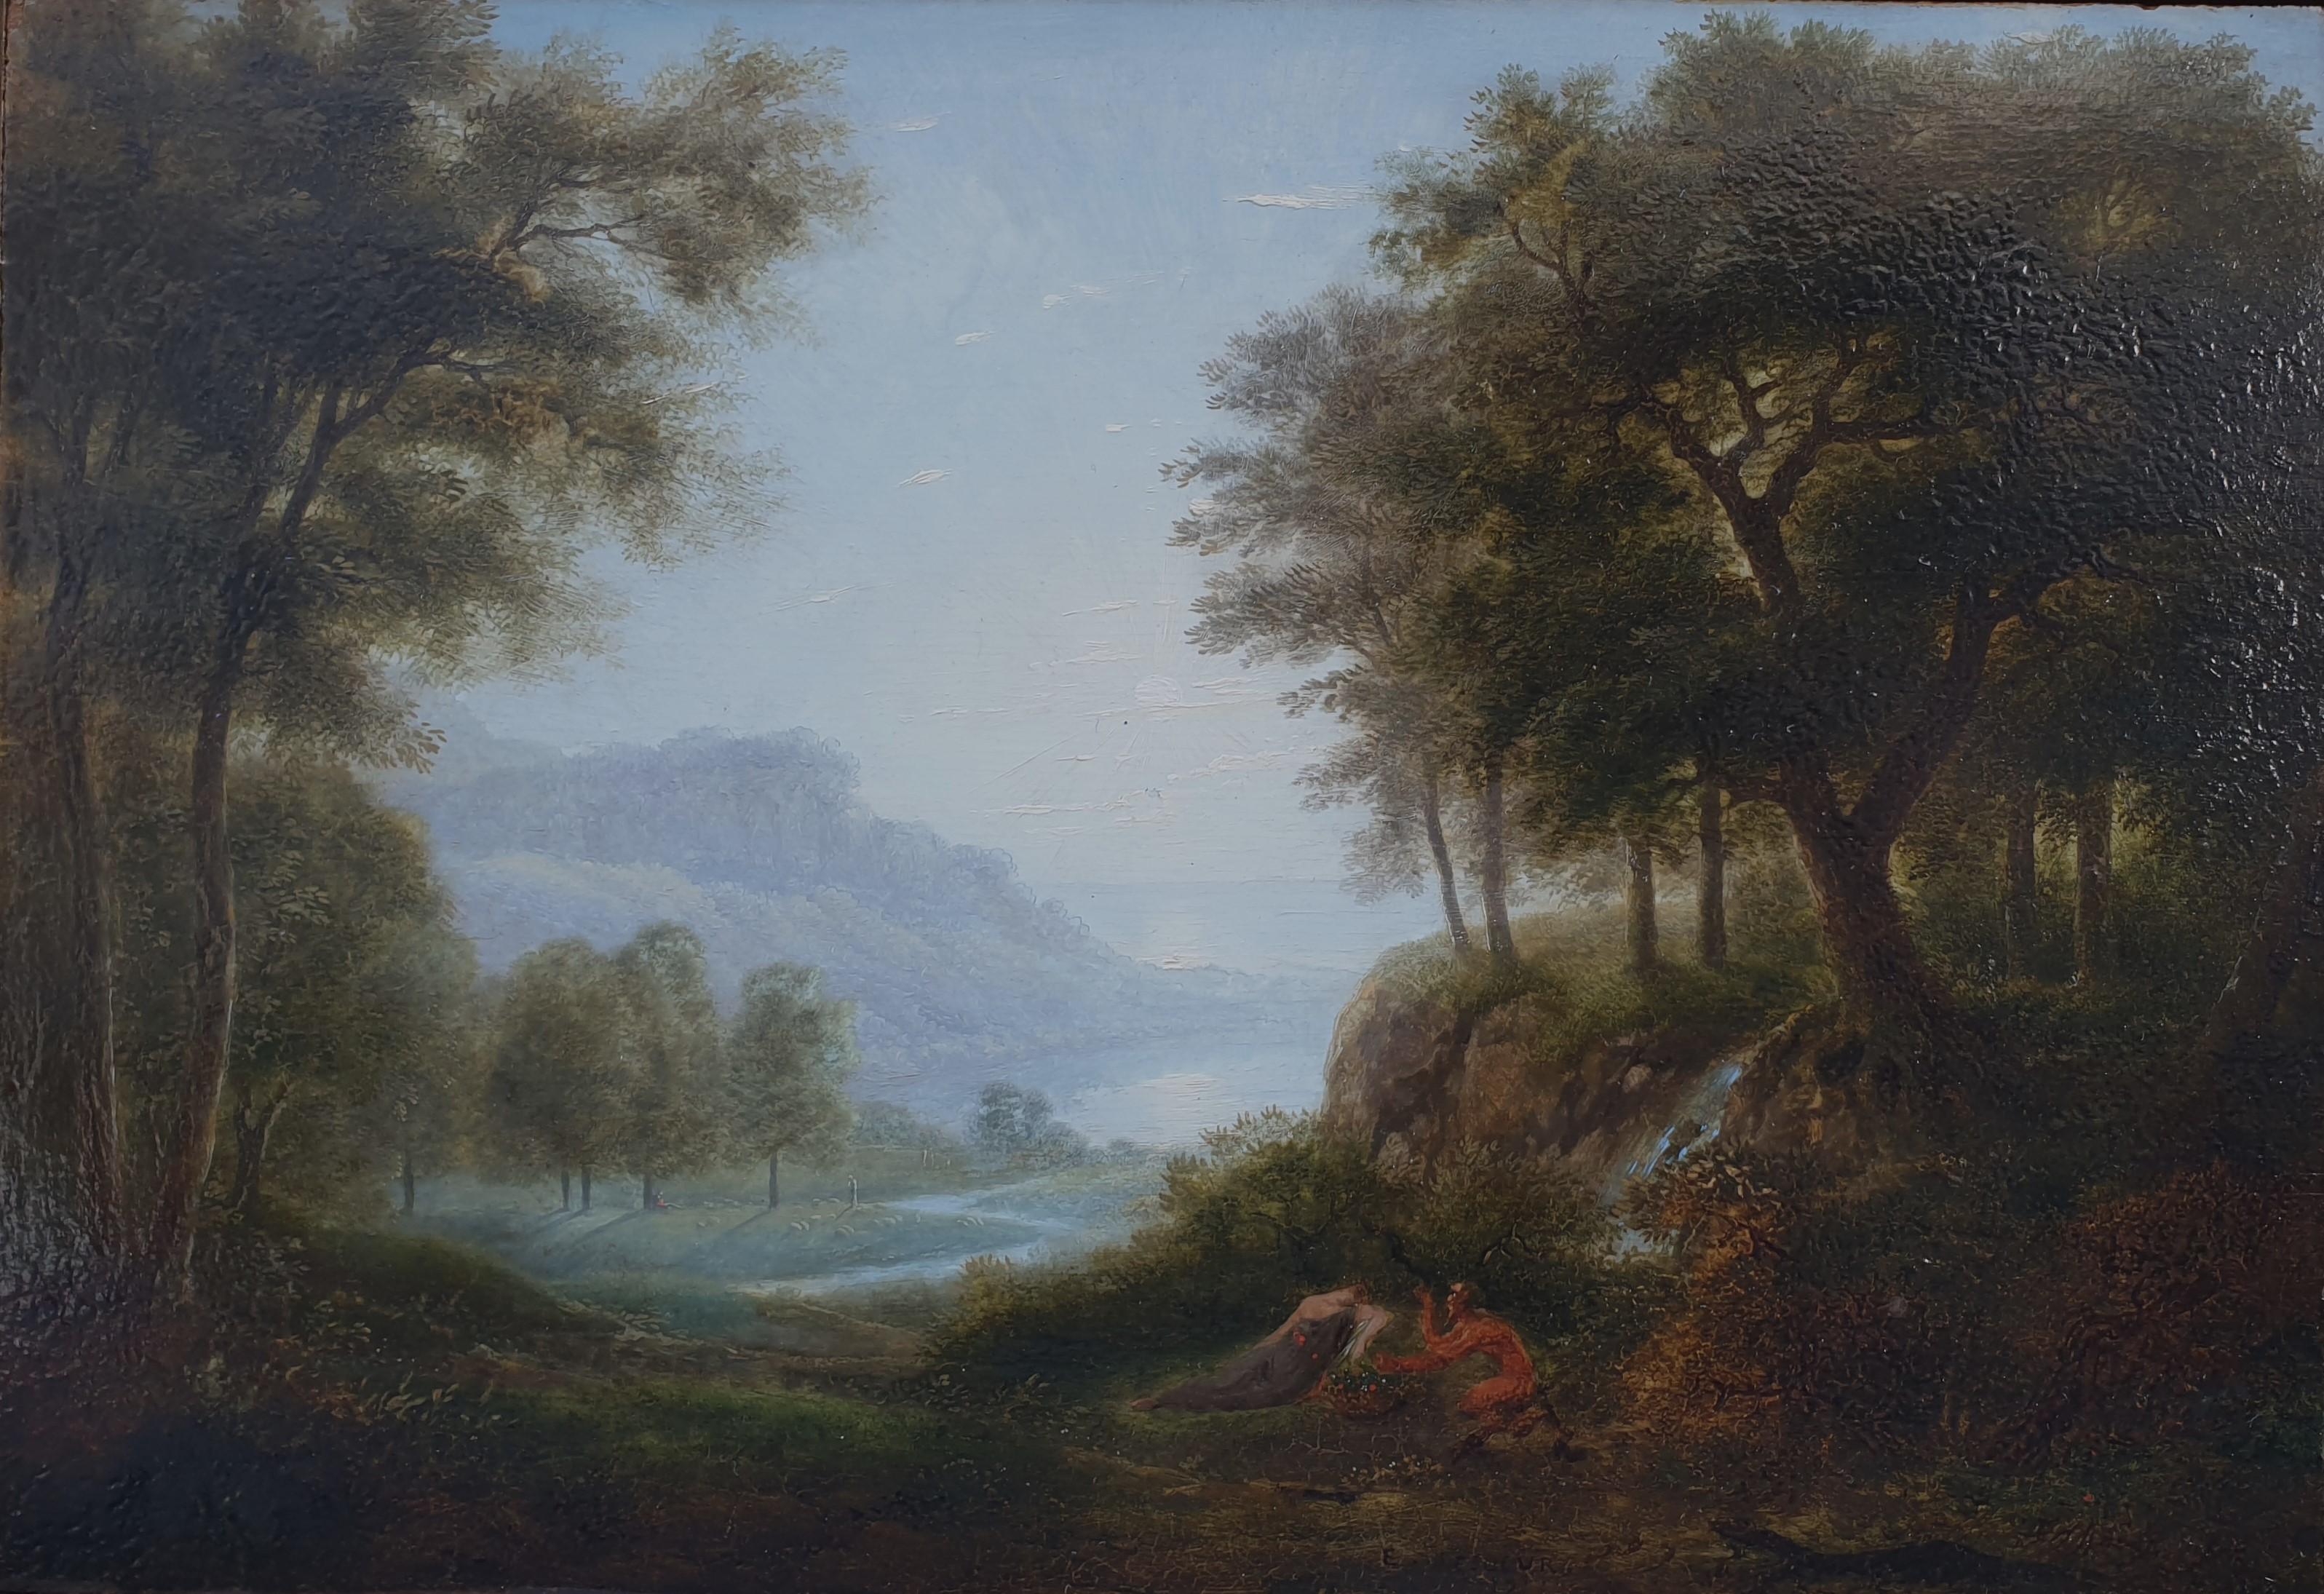 LESUEUR Neo-classical Classical Landscape with a faune French 19th Oil on panel - Painting by Pierre Etienne LESUEUR